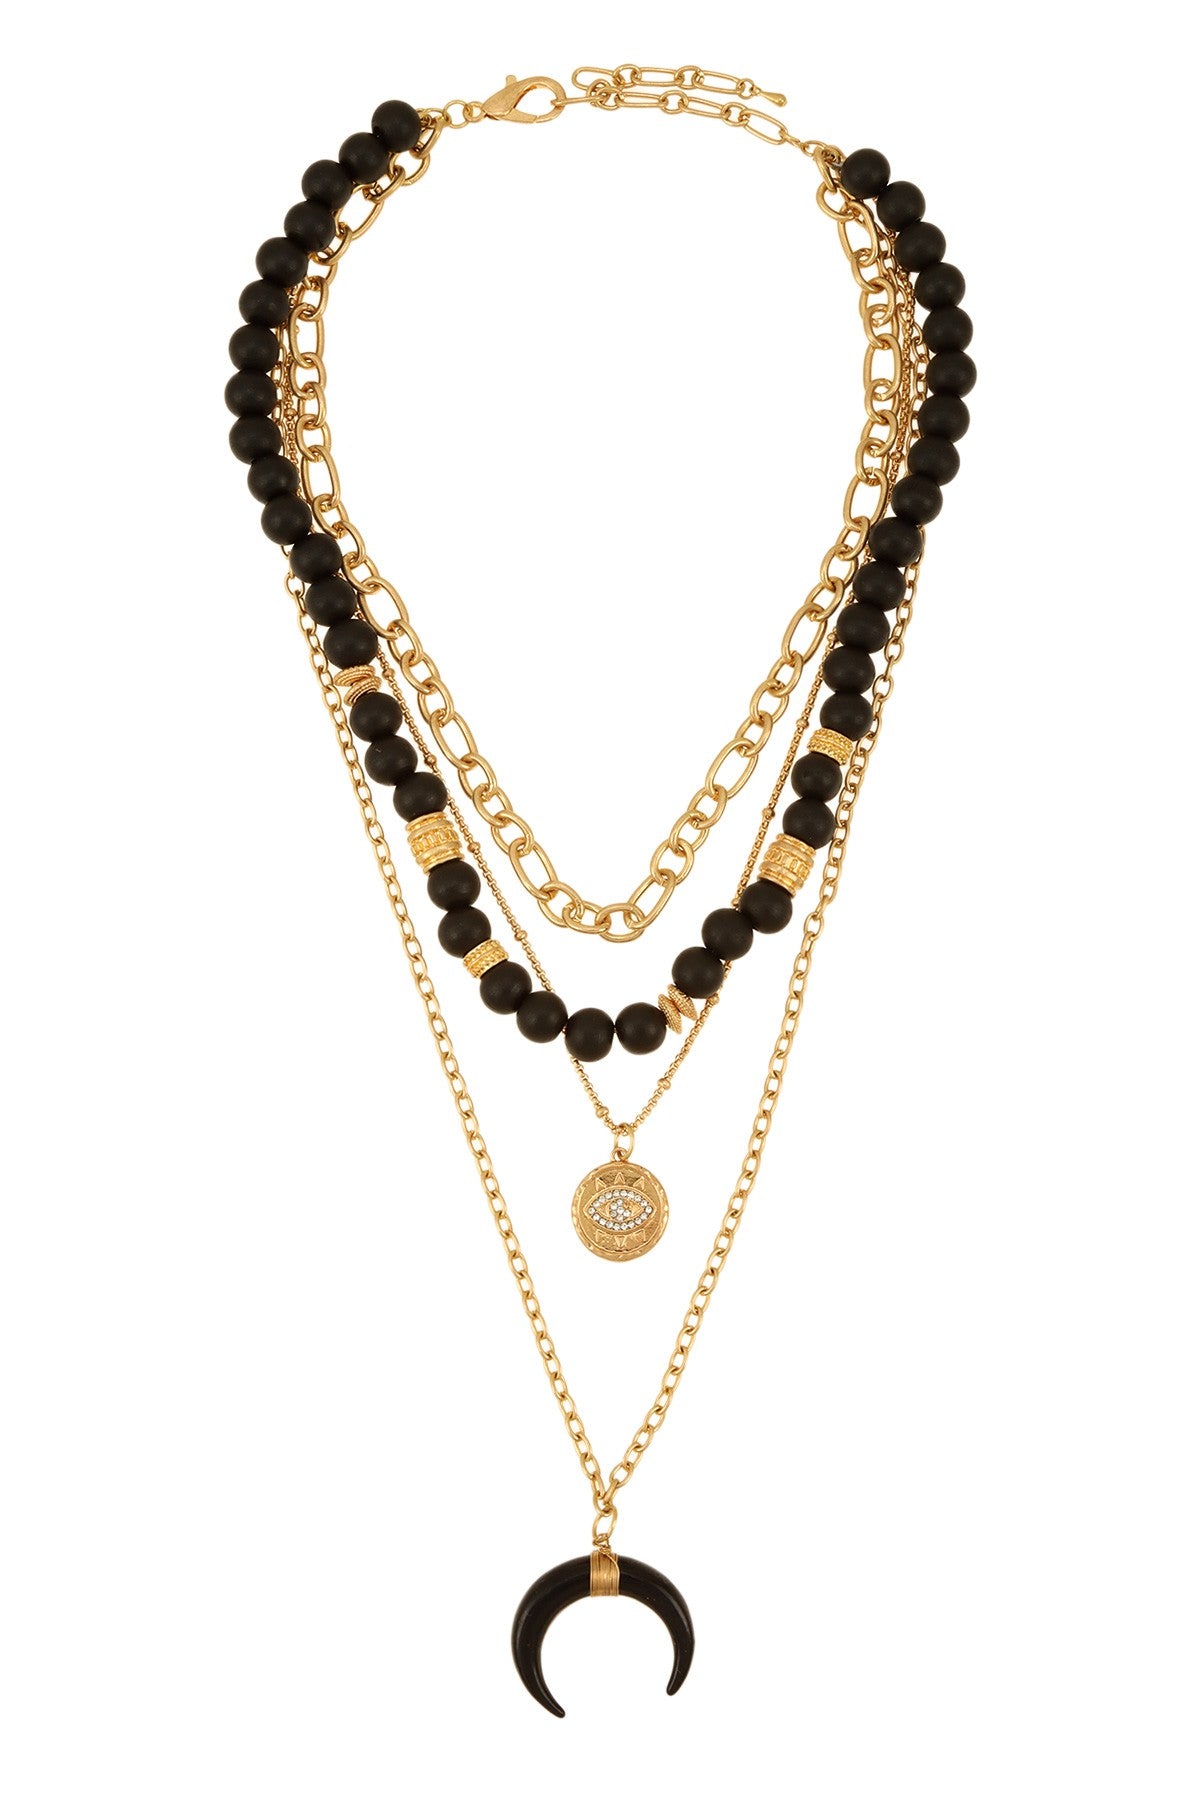 By The Horns - Multi Chain Layered Necklace